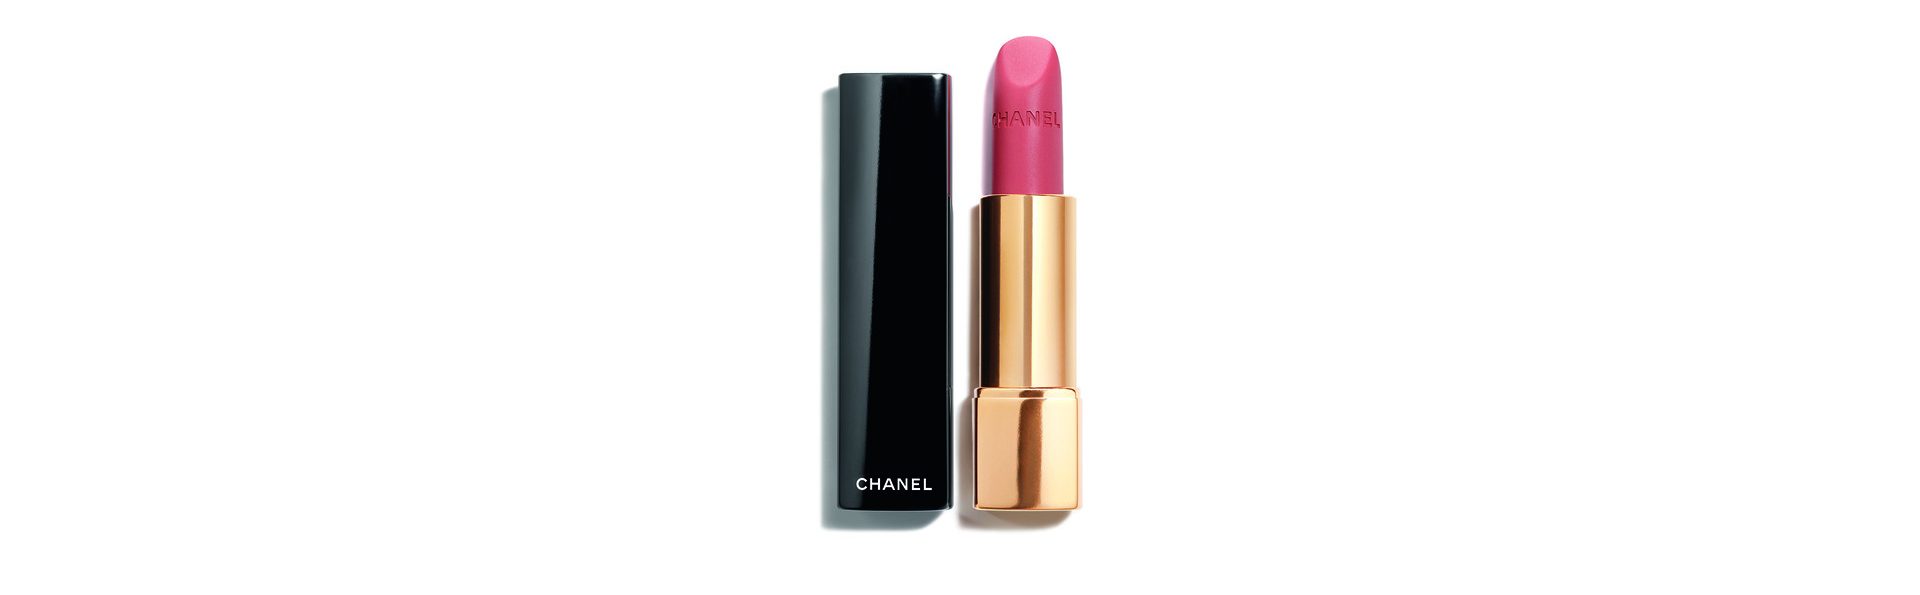 Chanel Low Key  Mode Rouge Allure Velvet Lipsticks Reviews  Swatches